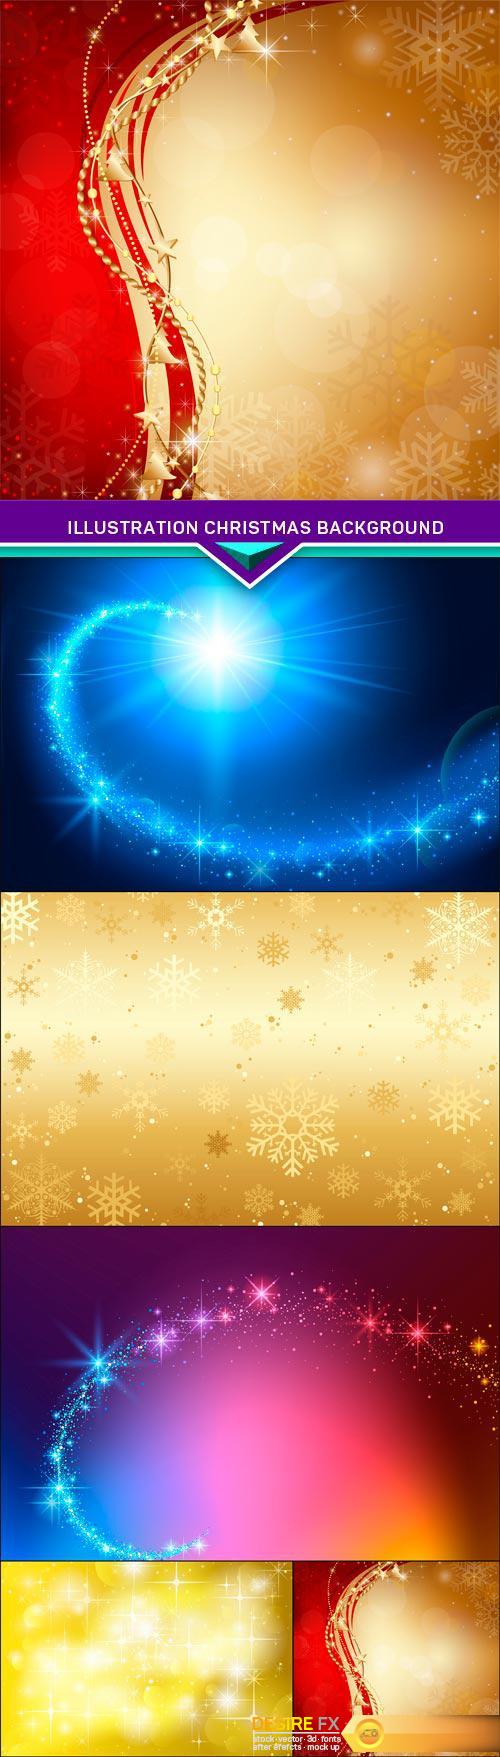 Illustration Christmas background with snowflakes 5X EPS